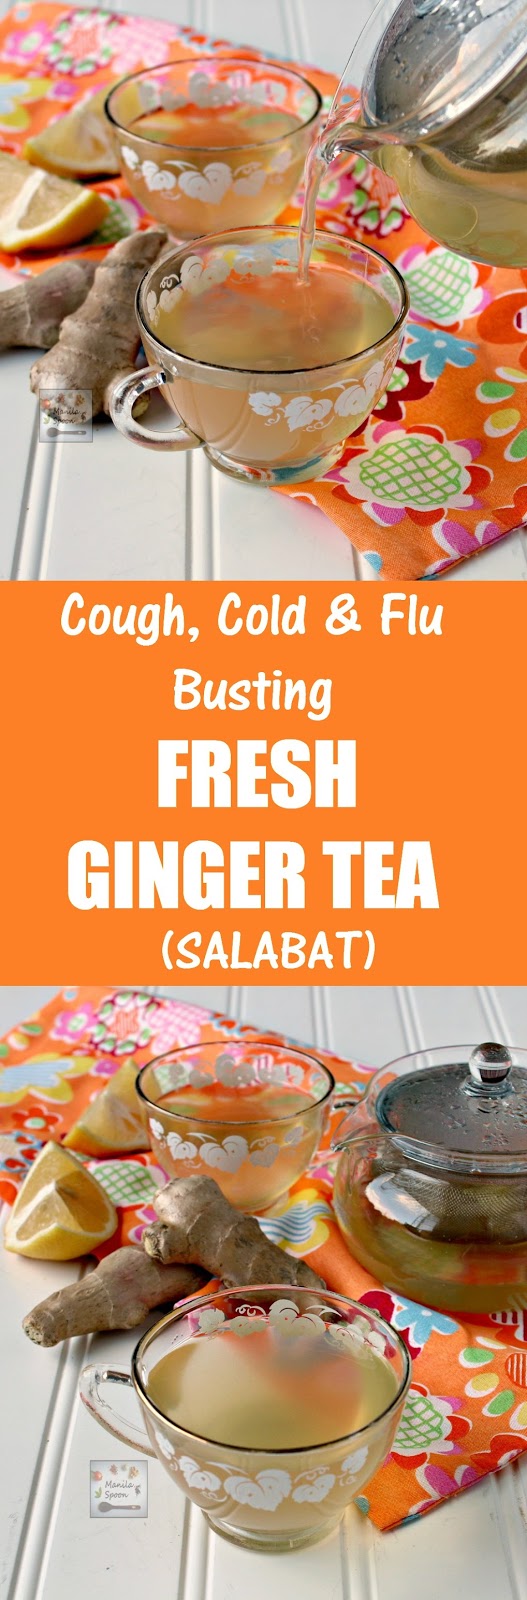 This is what I drink whenever I feel the onset of cold,cough, sore throat or flu. This fresh ginger tea with honey (salabat) helps boost your immune system and fight the nasty bugs. A delicious natural remedy that's also perfect for tea time. | manilaspoon.com